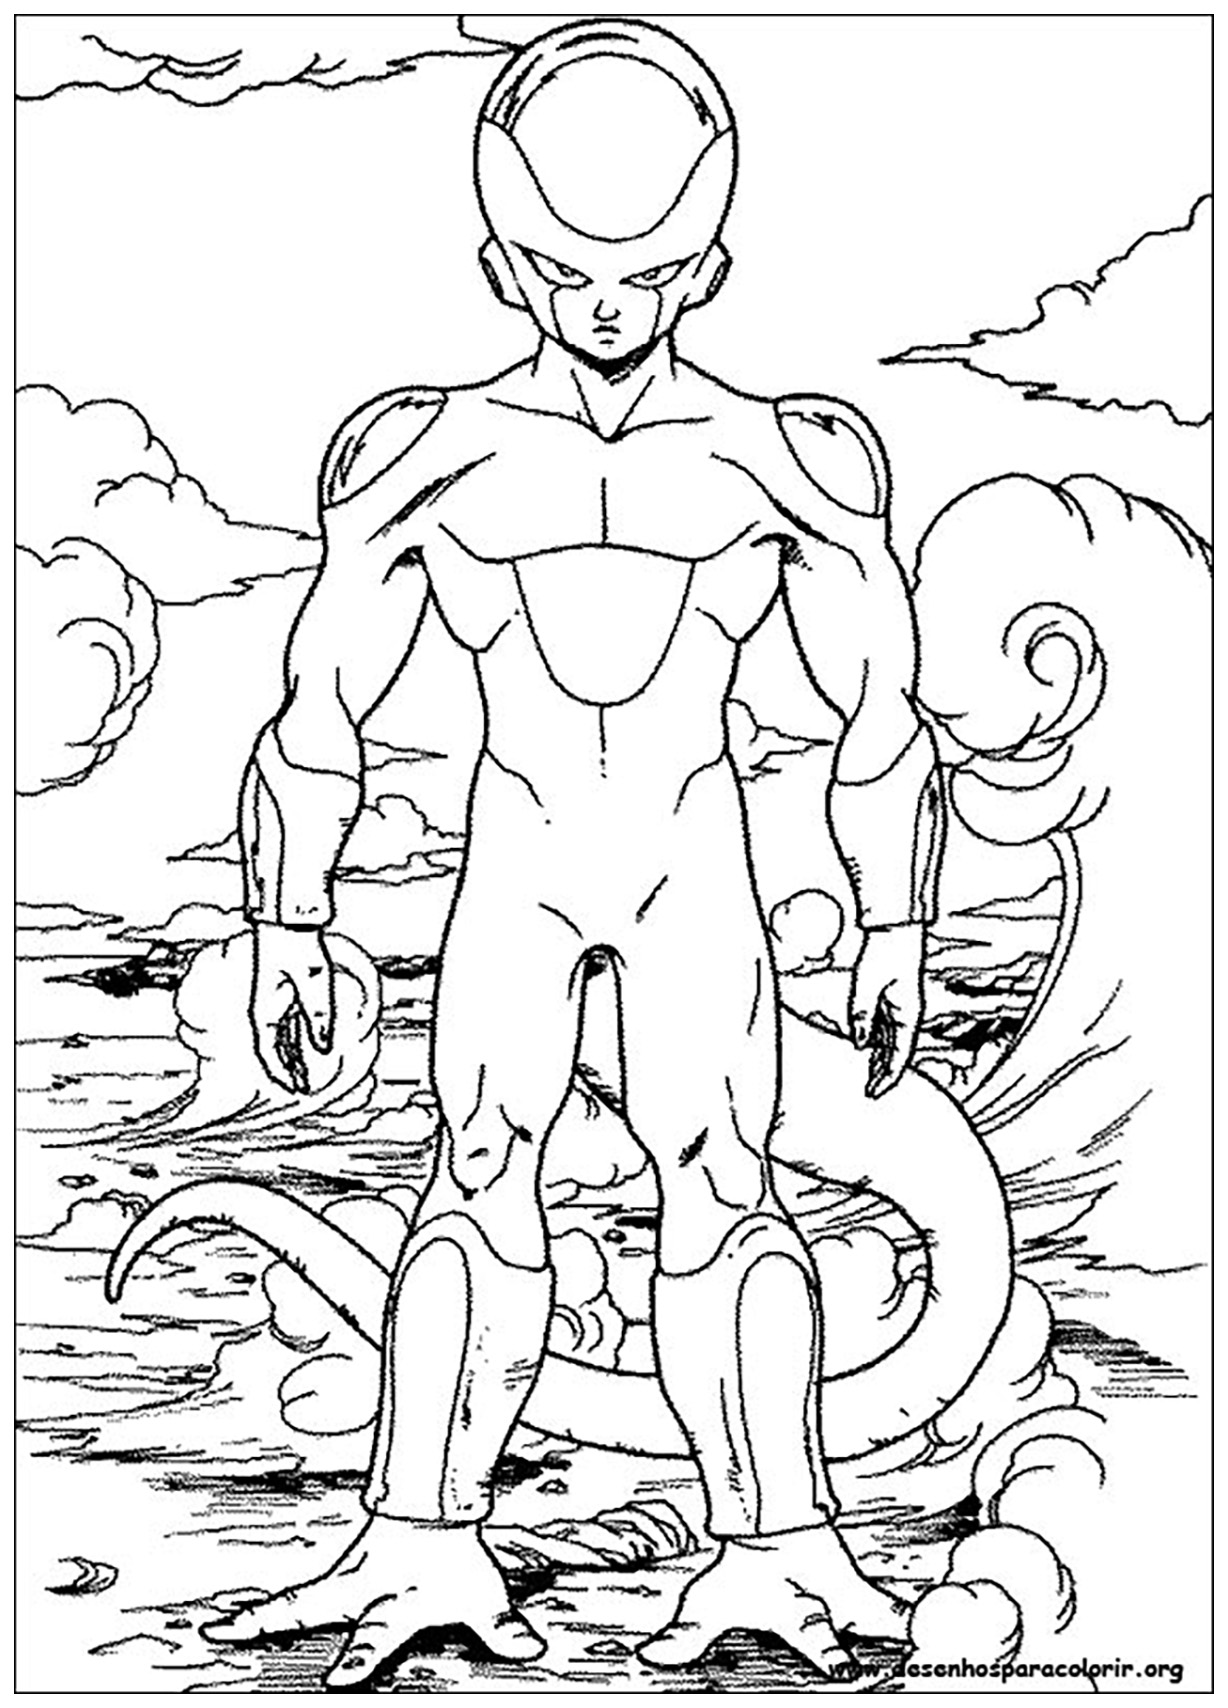 Simple Dragon Ball Z coloring page for children : Freezer